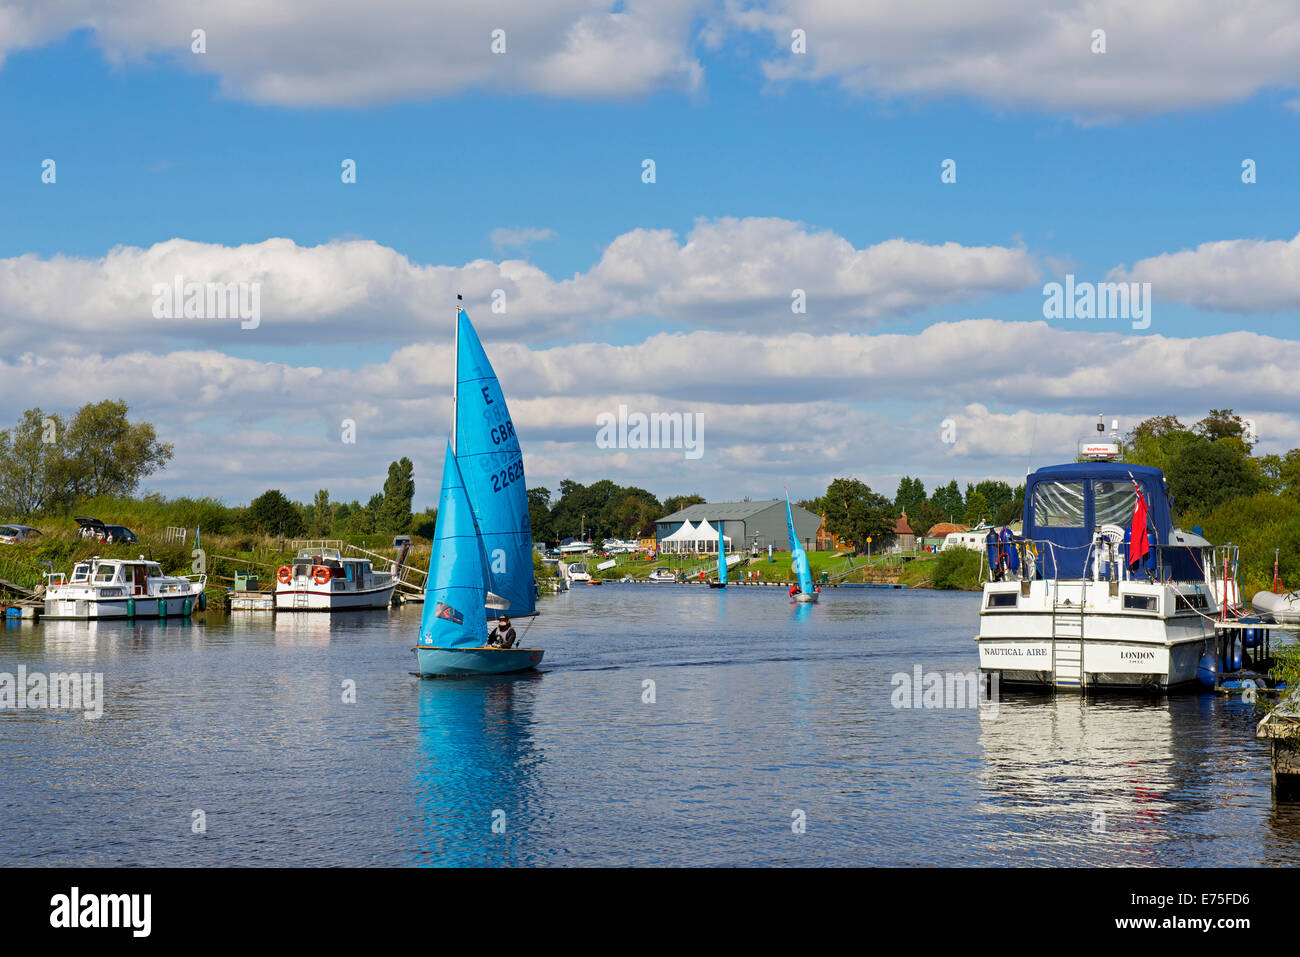 Sailing dinghy on the River Ouse at Naburn, near York, North Yorkshire, England UK Stock Photo